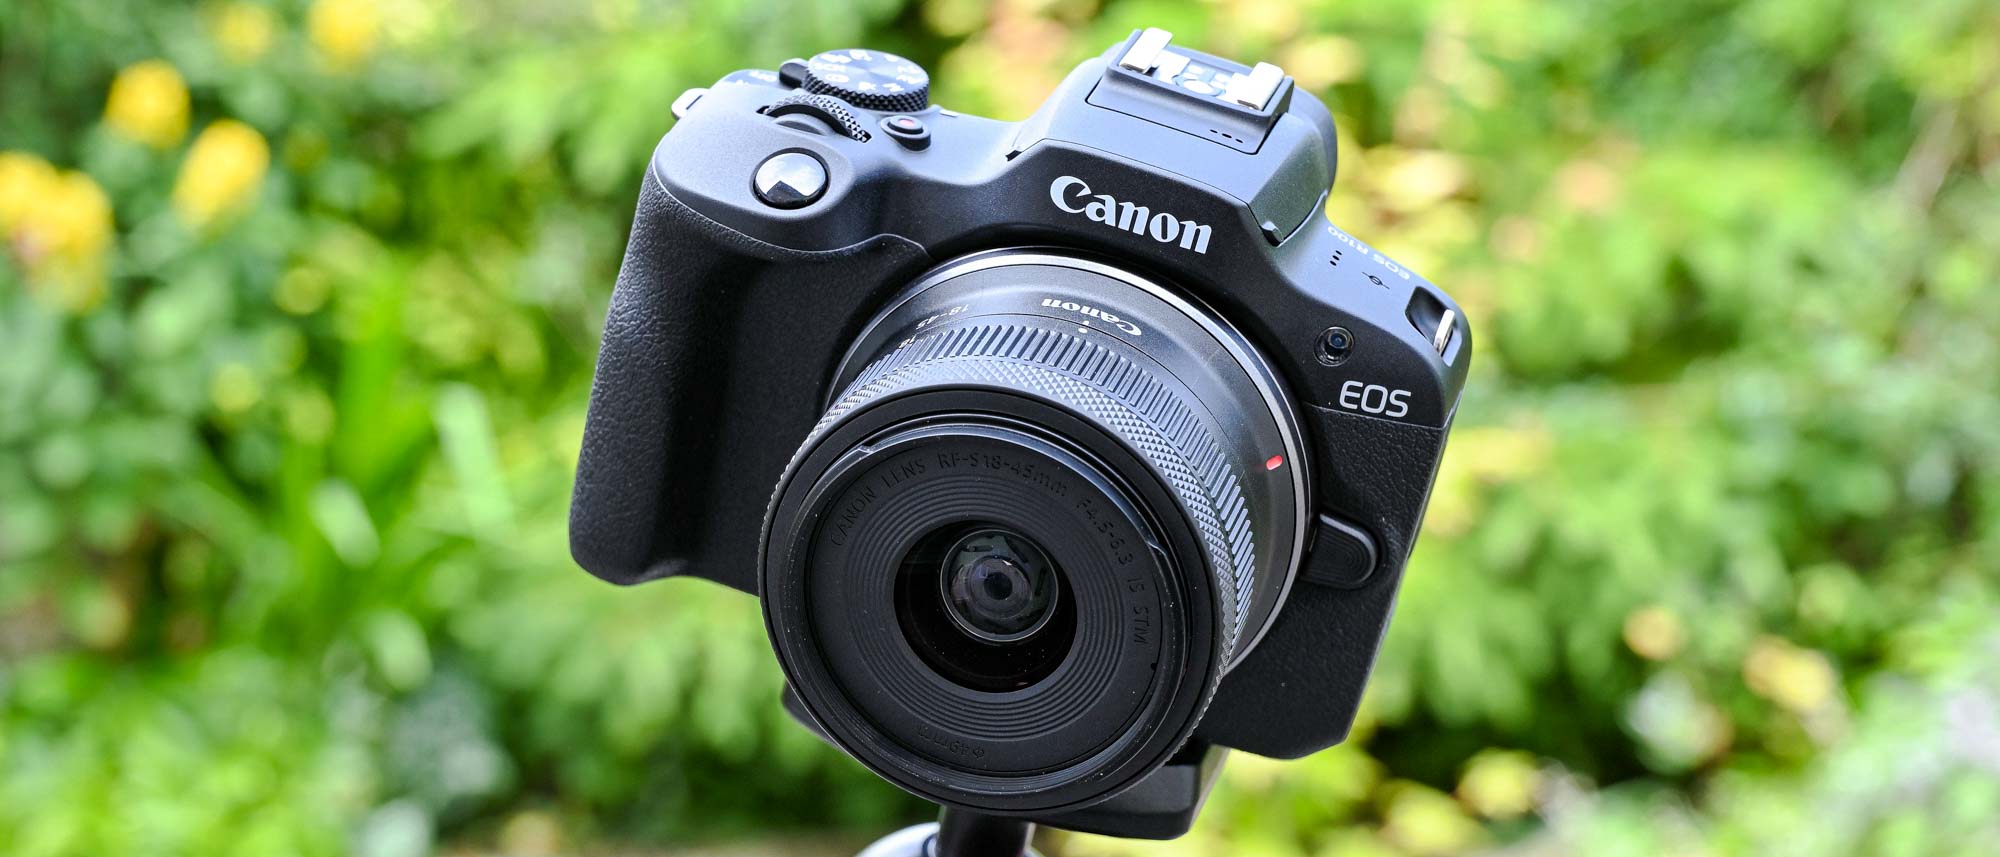 Canon Eos R100 Mirrorless Dslr Camera & 18-45mm IS STM lens